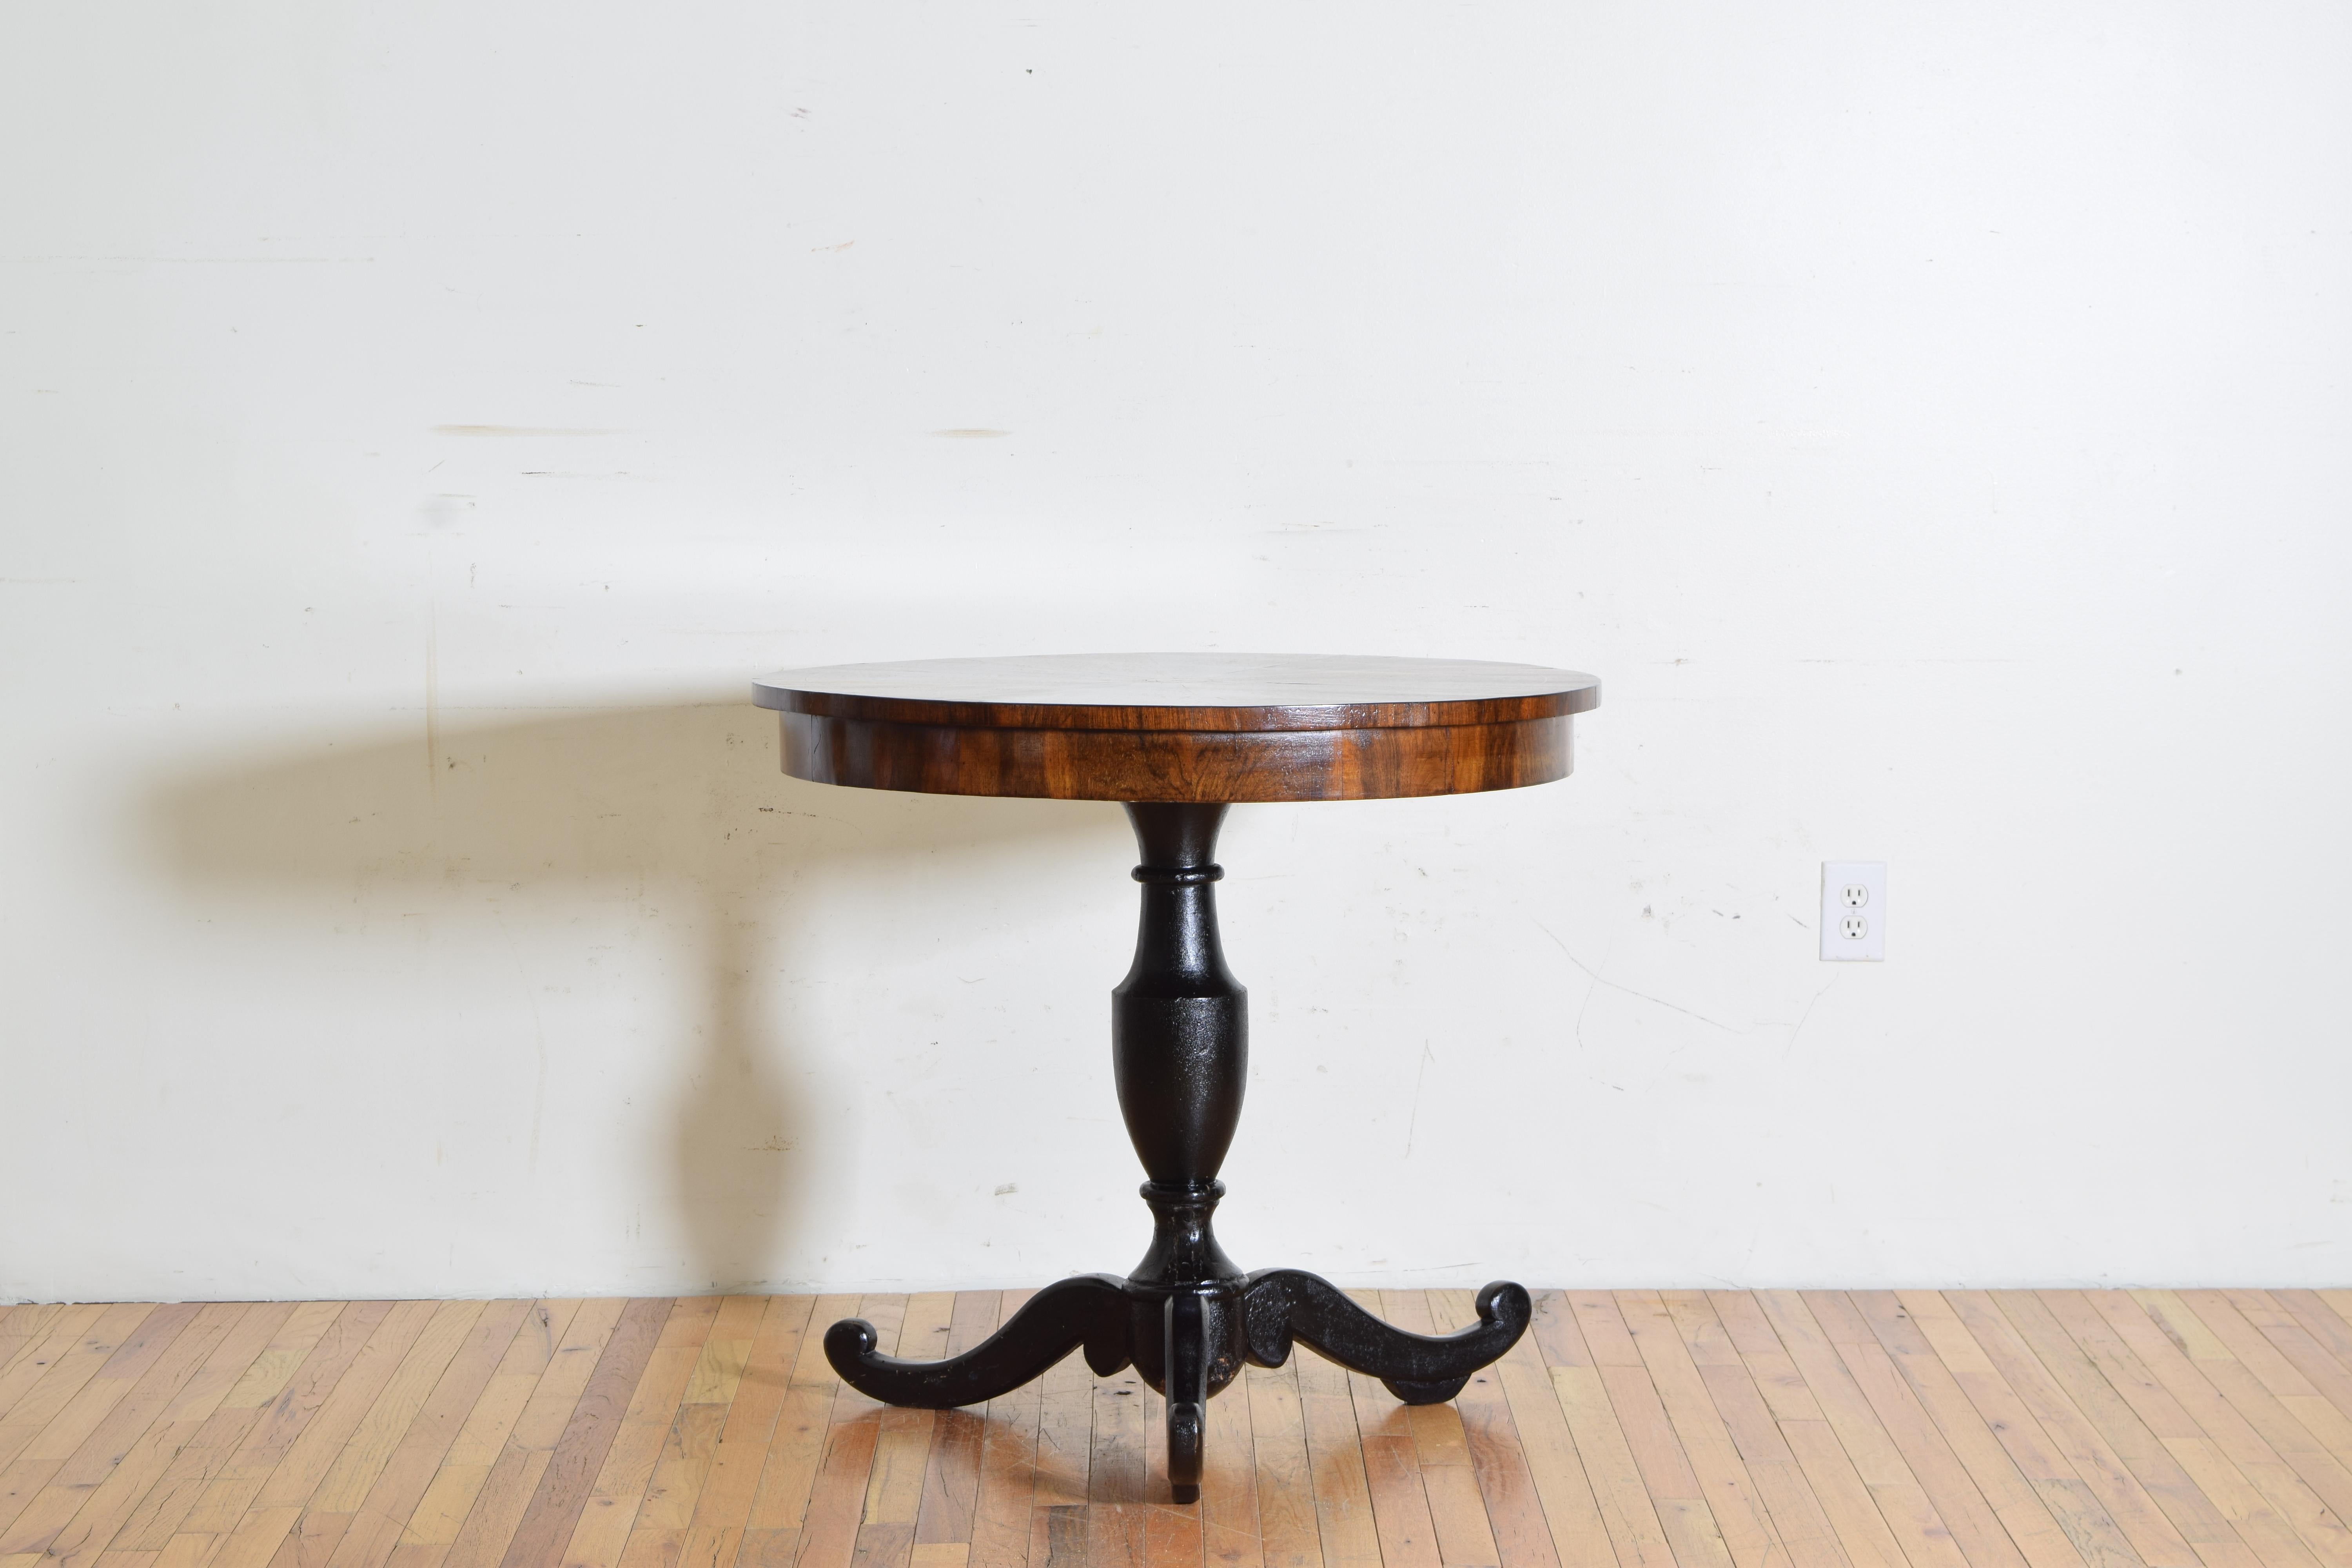 The top comprised of 12 pie shaped pieces of veneer radiating from a centrally inlaid circle with 4 concentric lozenge forms all in a lighter fruitwood with a thin radial outer band of lighter fruitwood, possibly a bleached walnut, the apron with